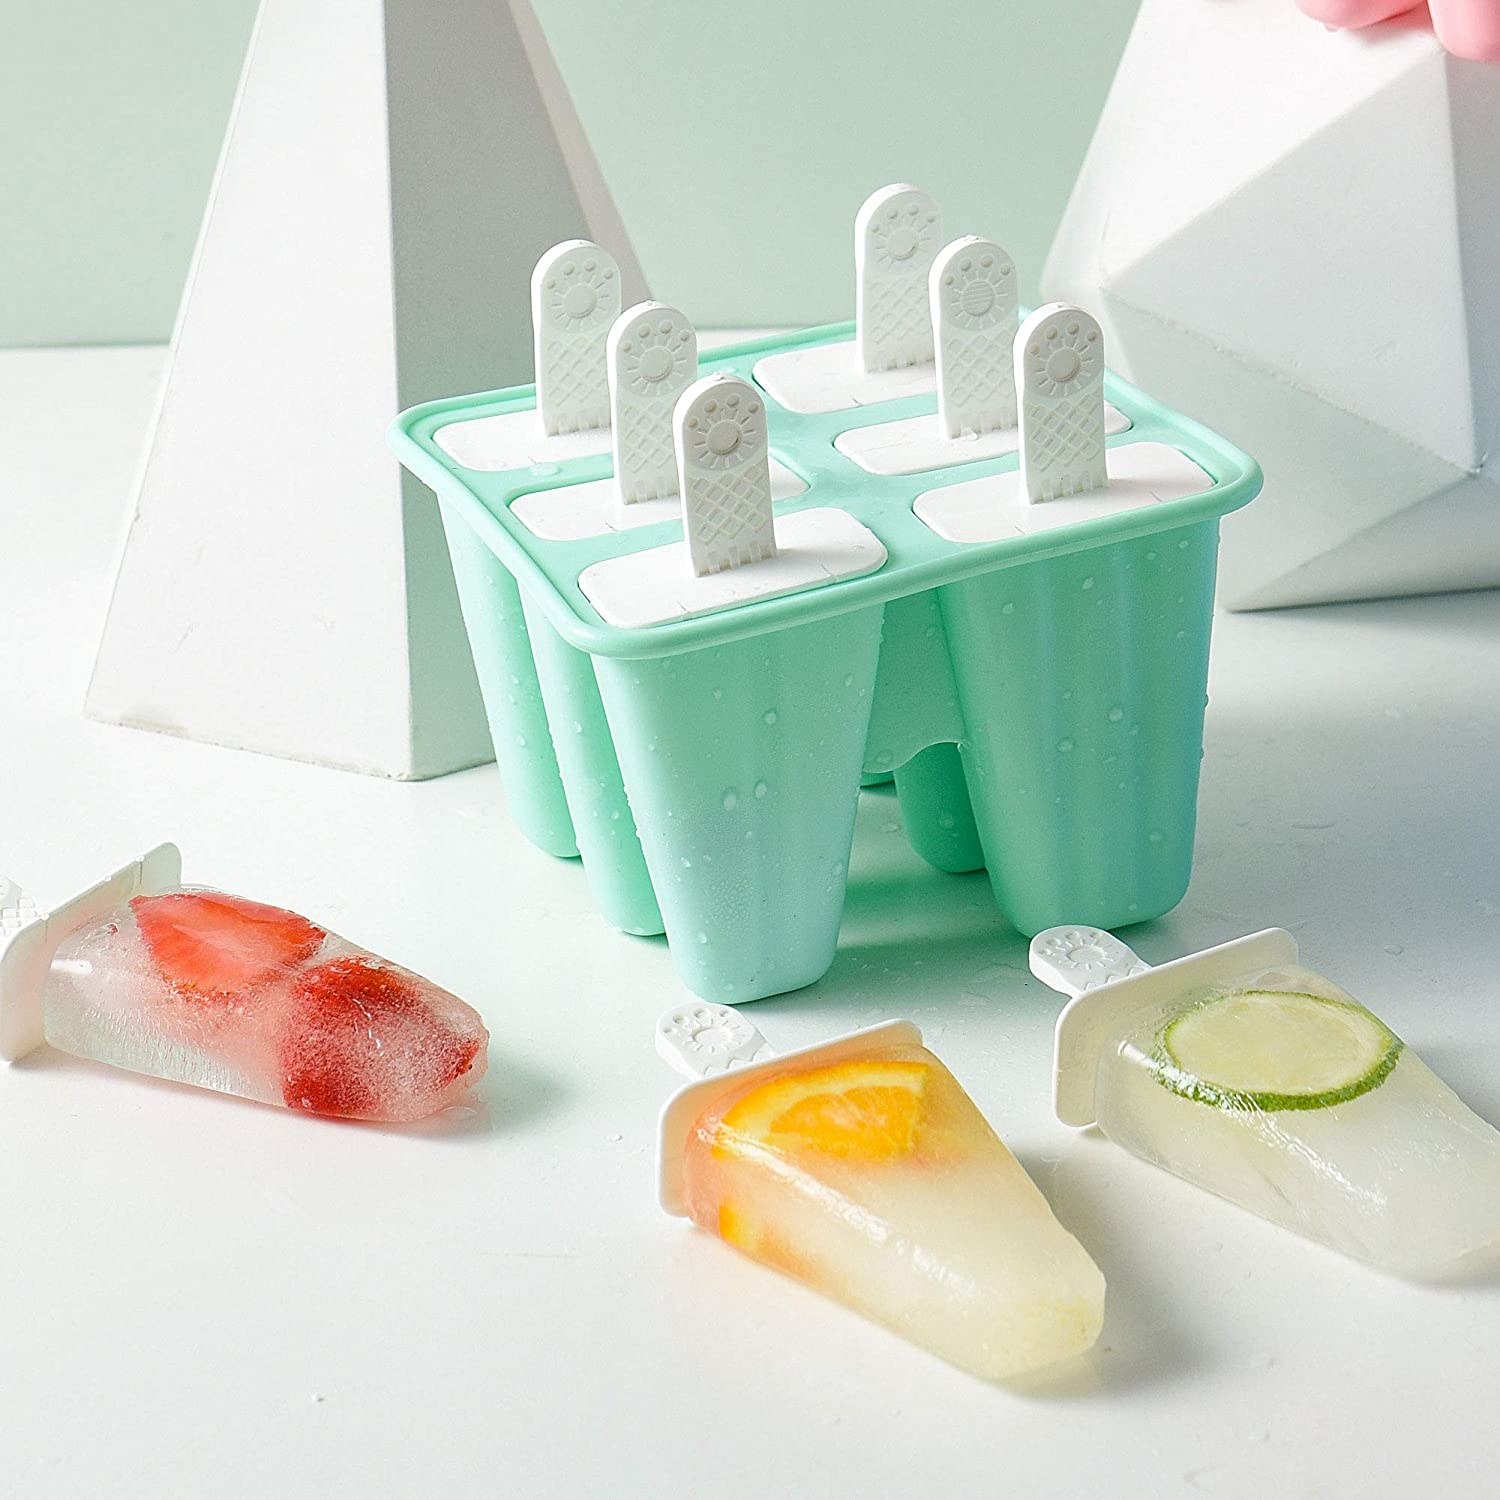 Popsicles surrounding the mould on a table